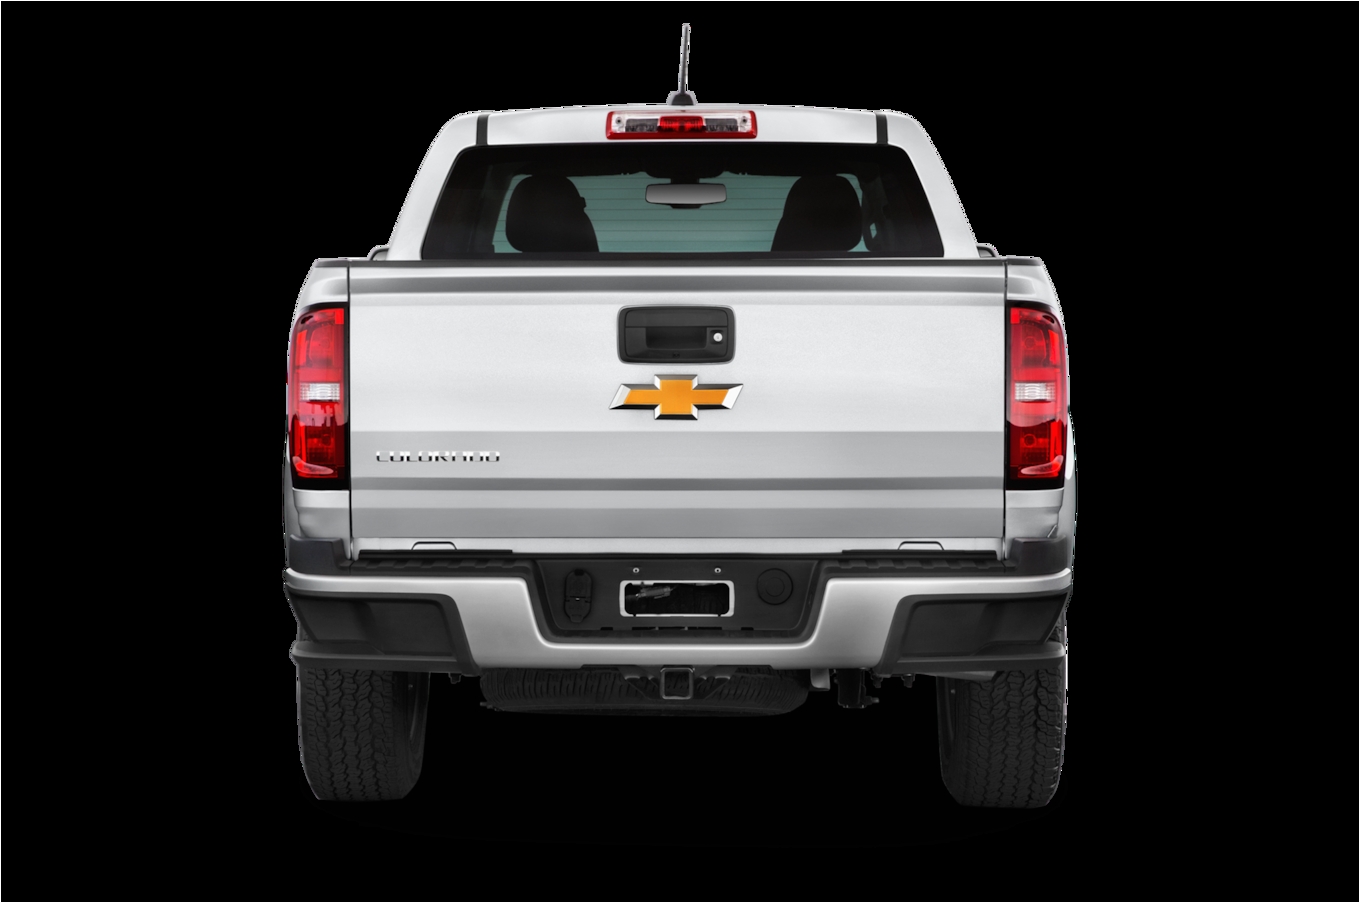 2005 Chevy Colorado Tail Lights 2017 Chevrolet Colorado Reviews and Rating Motor Trend